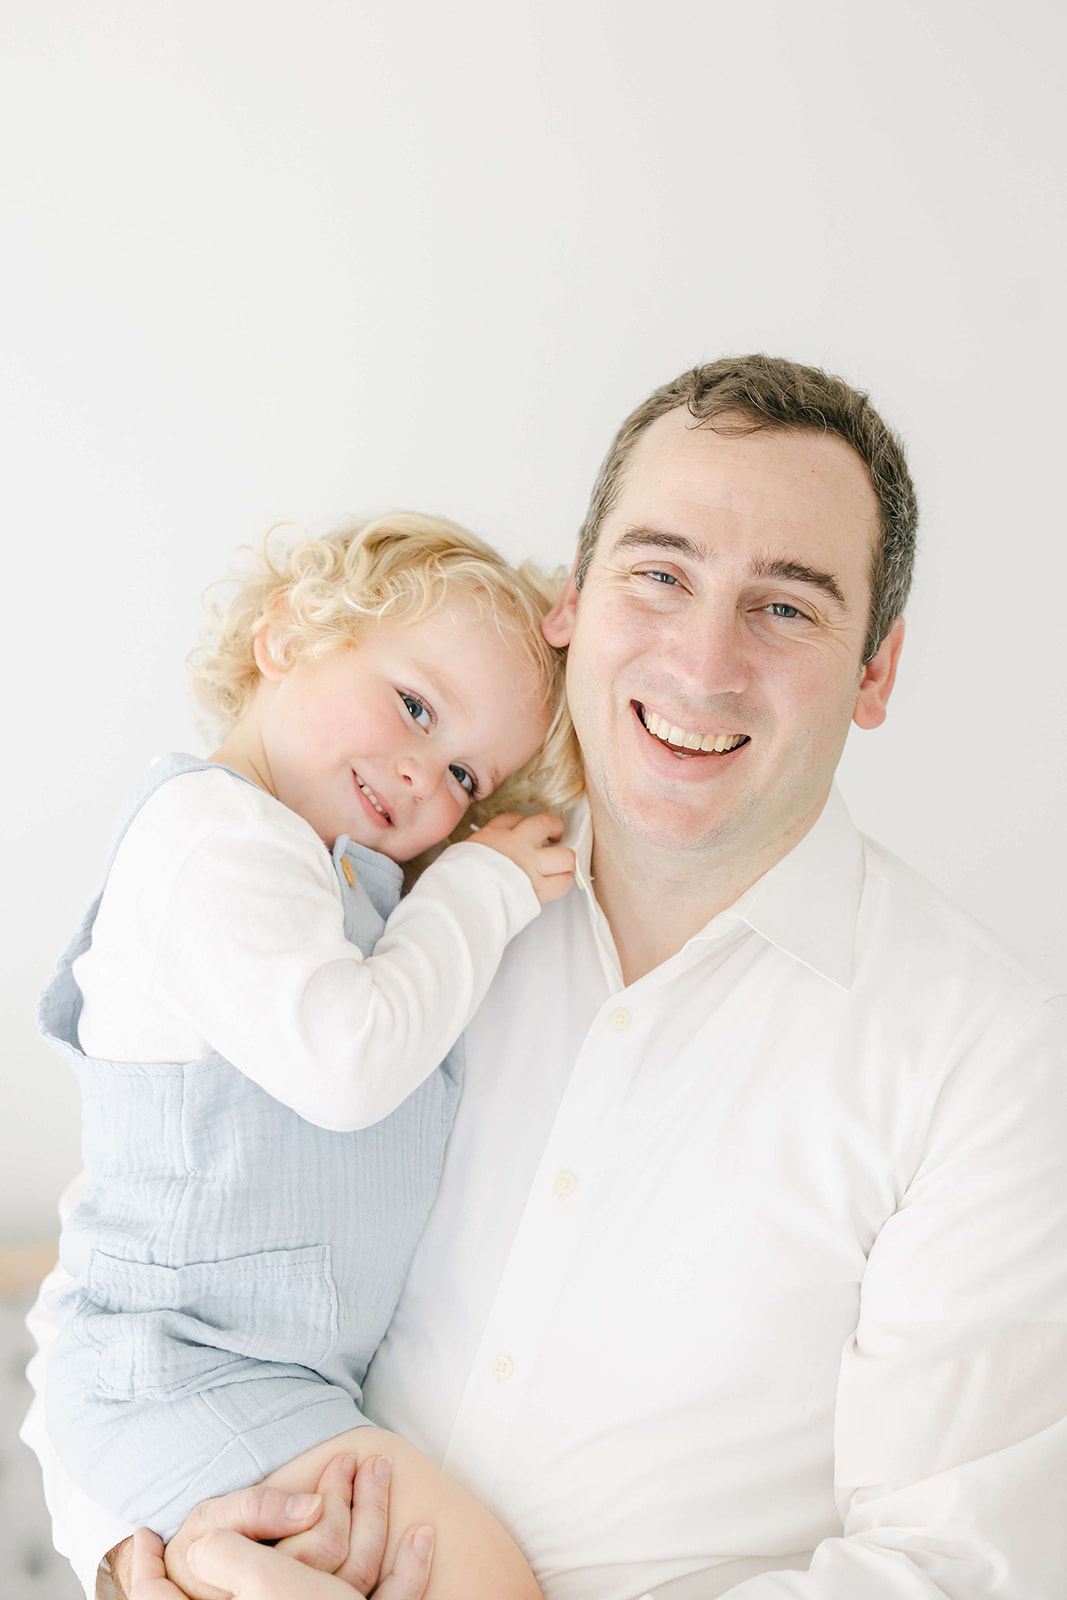 A toddler hugs onto daddy as he laughs and stands in a studio